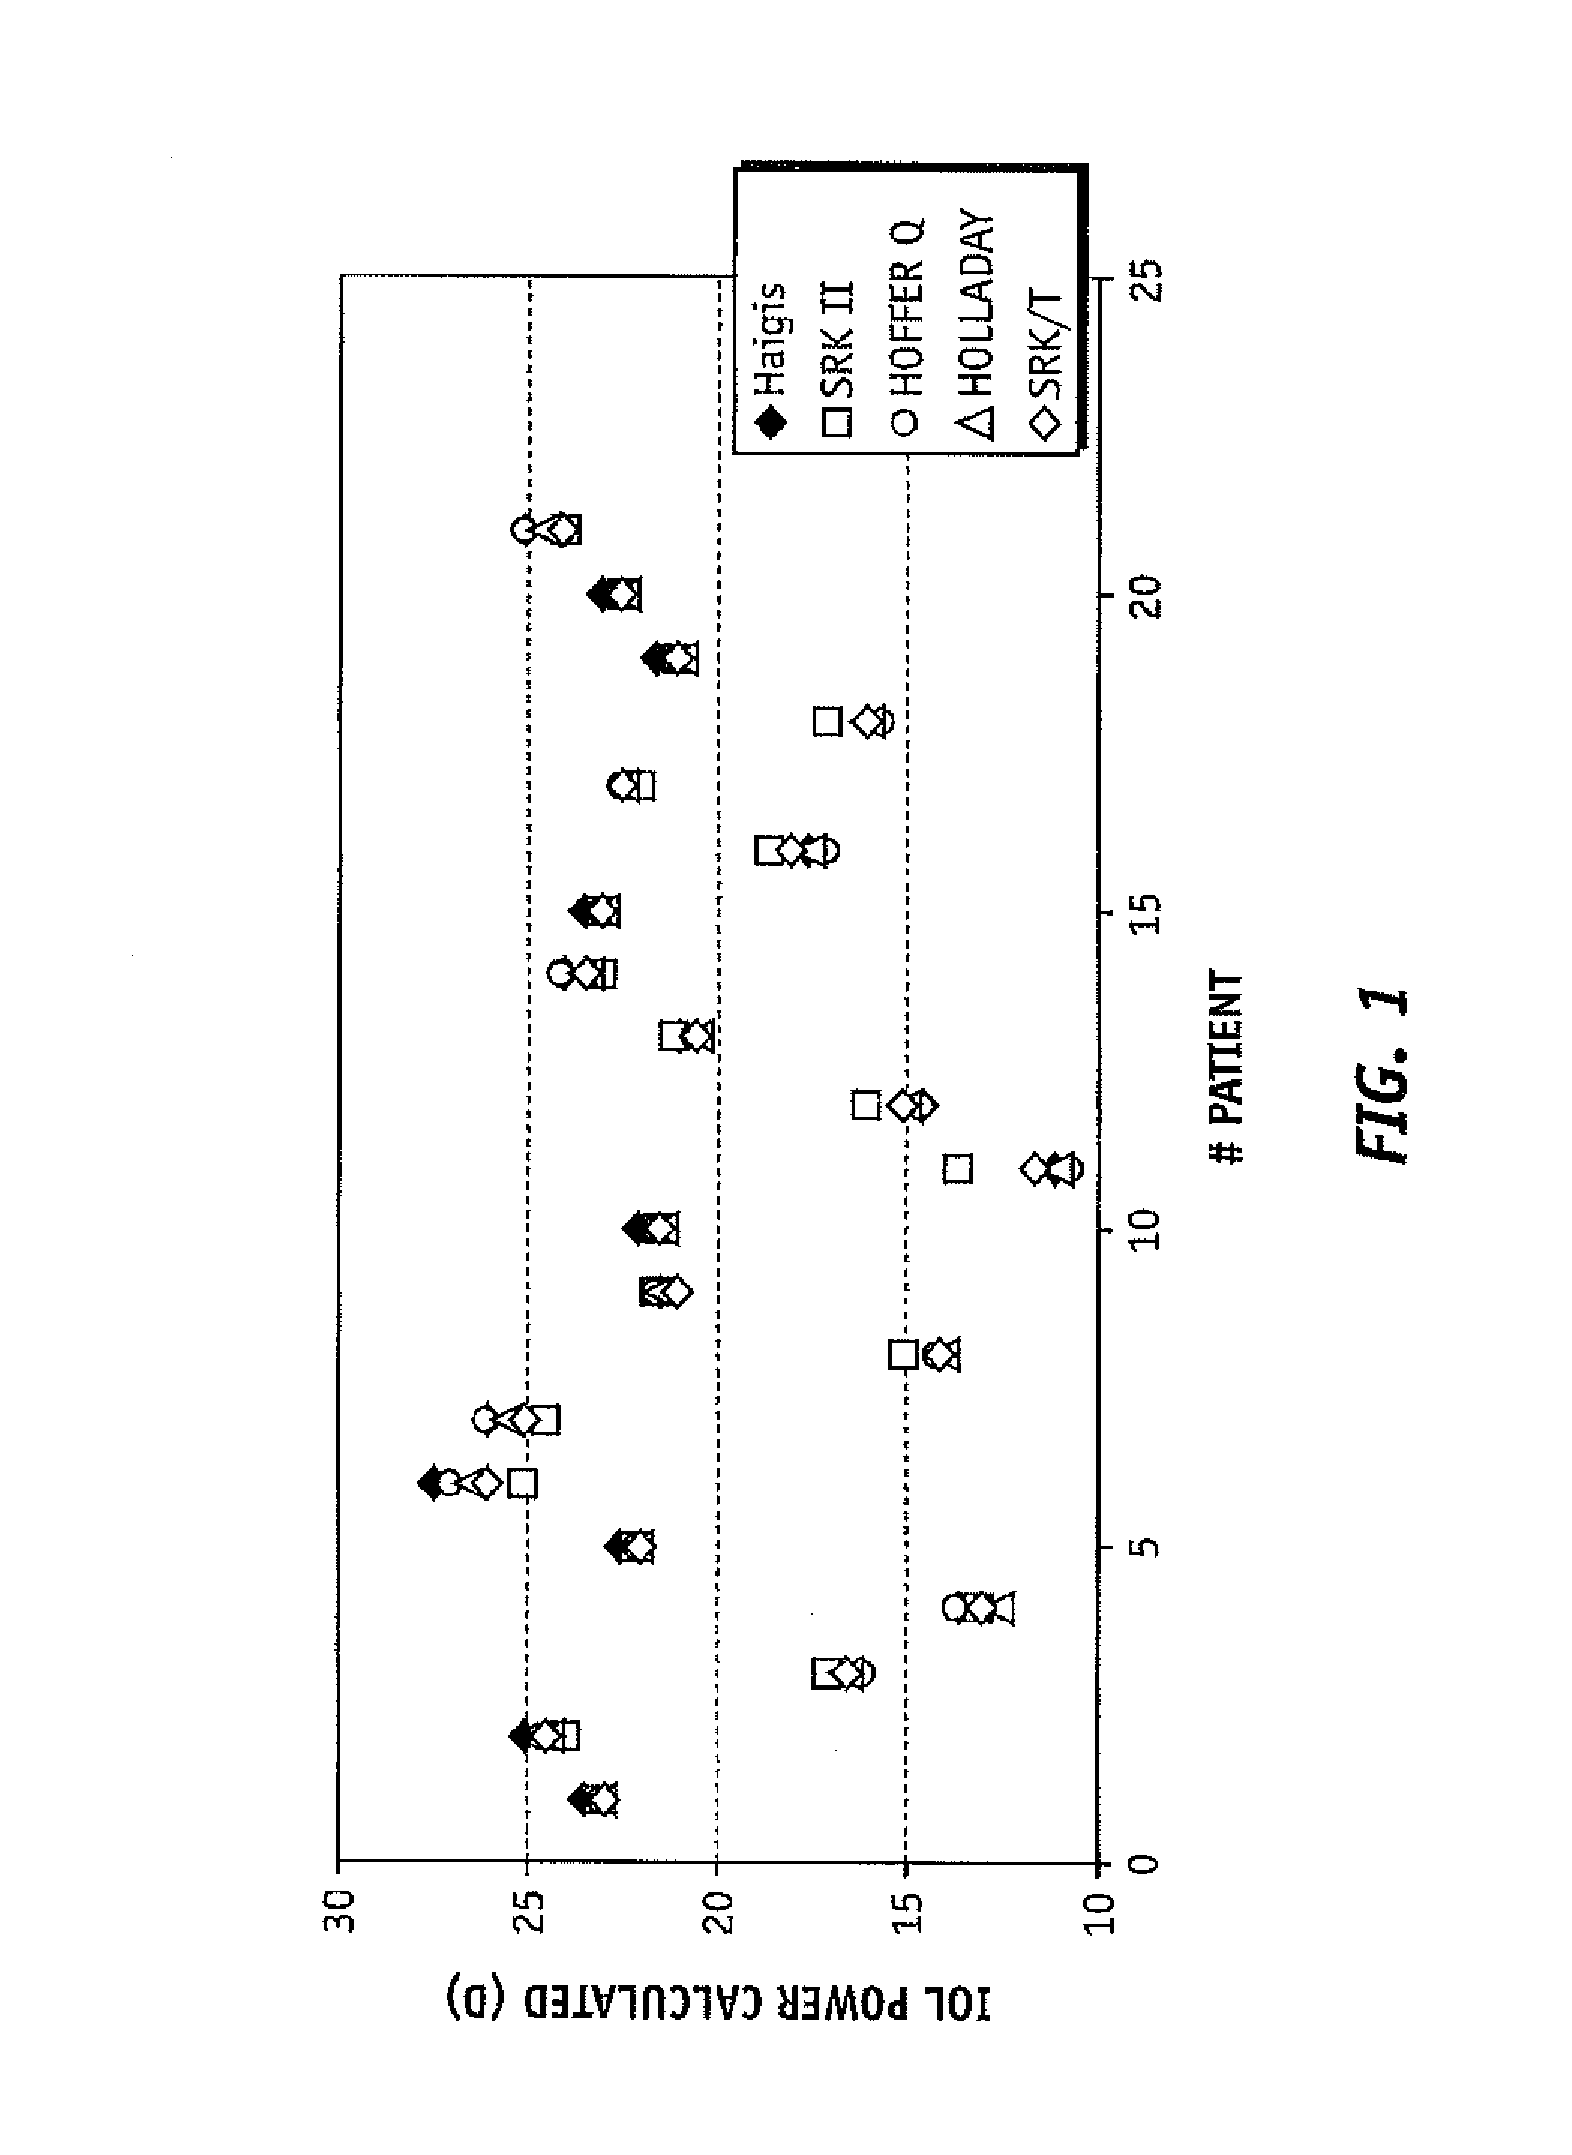 Apparatus, system, and method for intraocular lens power calculation using a regression formula incorporating corneal spherical aberration